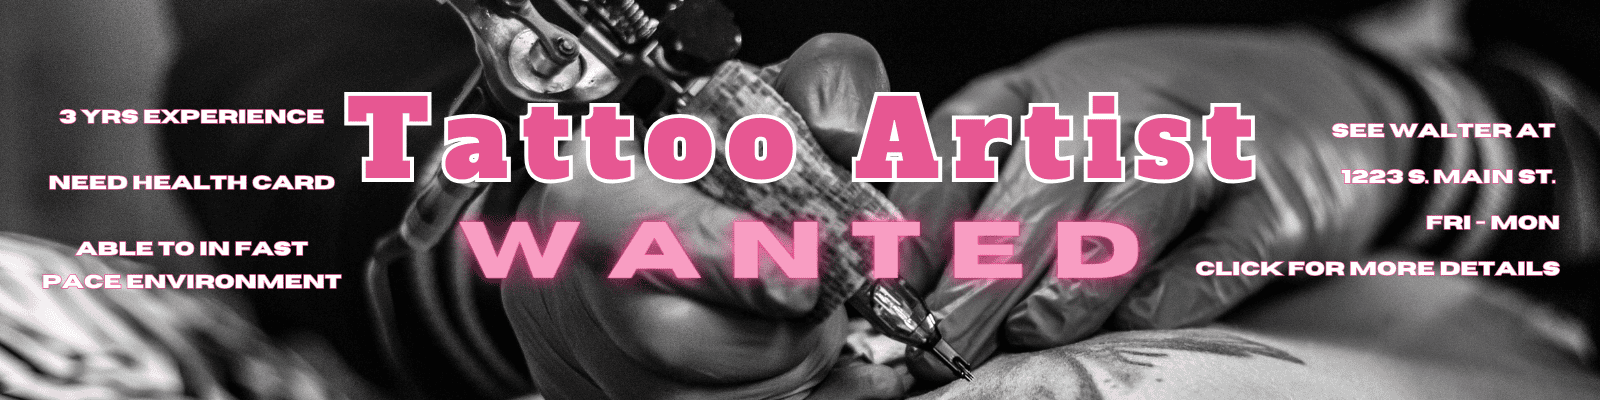 Tattoo Artist Wanted in Las Vegas. We are taking new tattoo apprentices also. If you can work in a fast pace like how Las Vegas, you can work here with the most amazing tattoo artist in the world. 